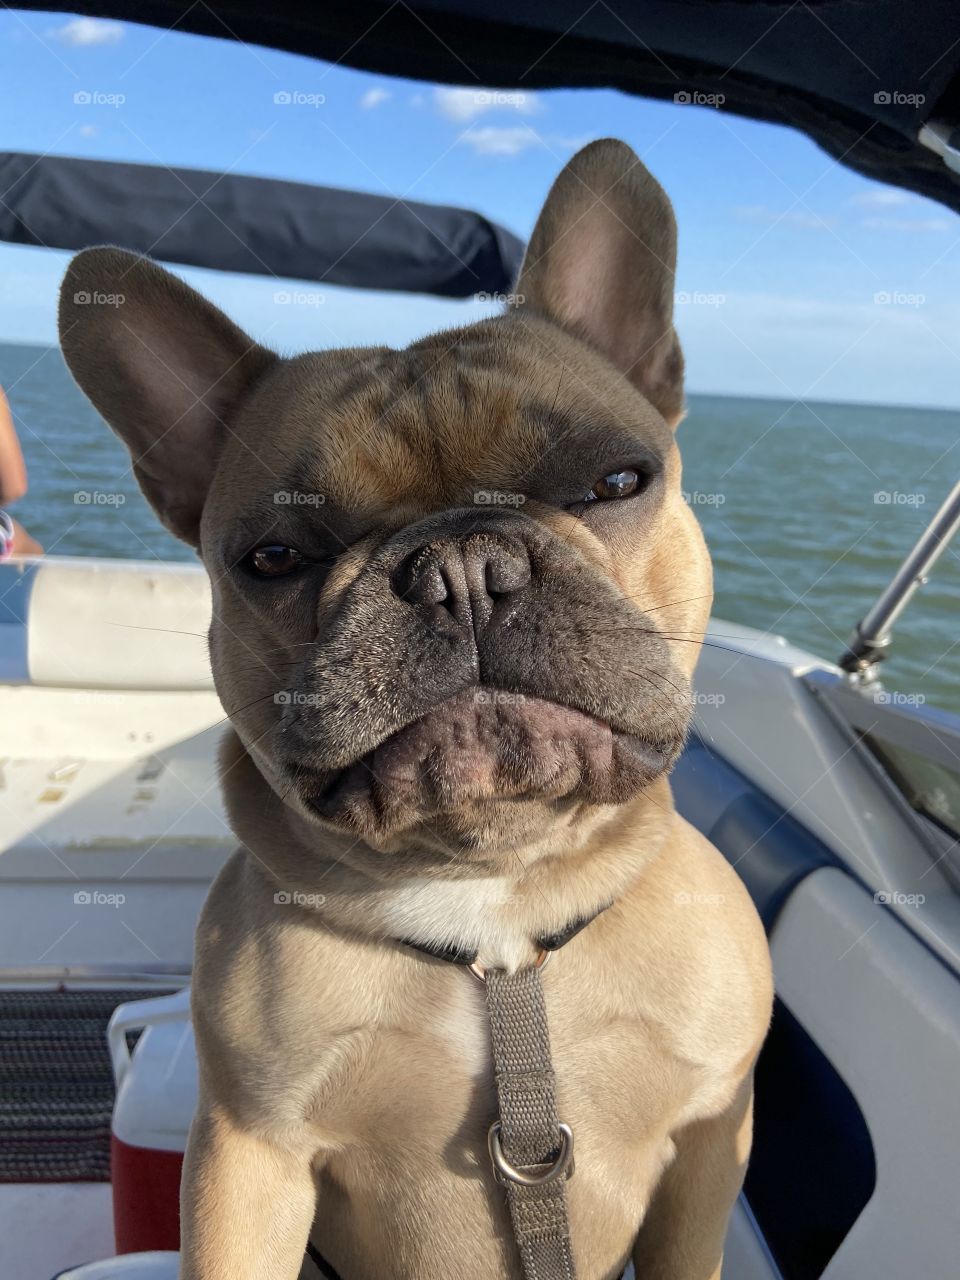 What exactly are you looking at? French Bulldog has some attitude! 